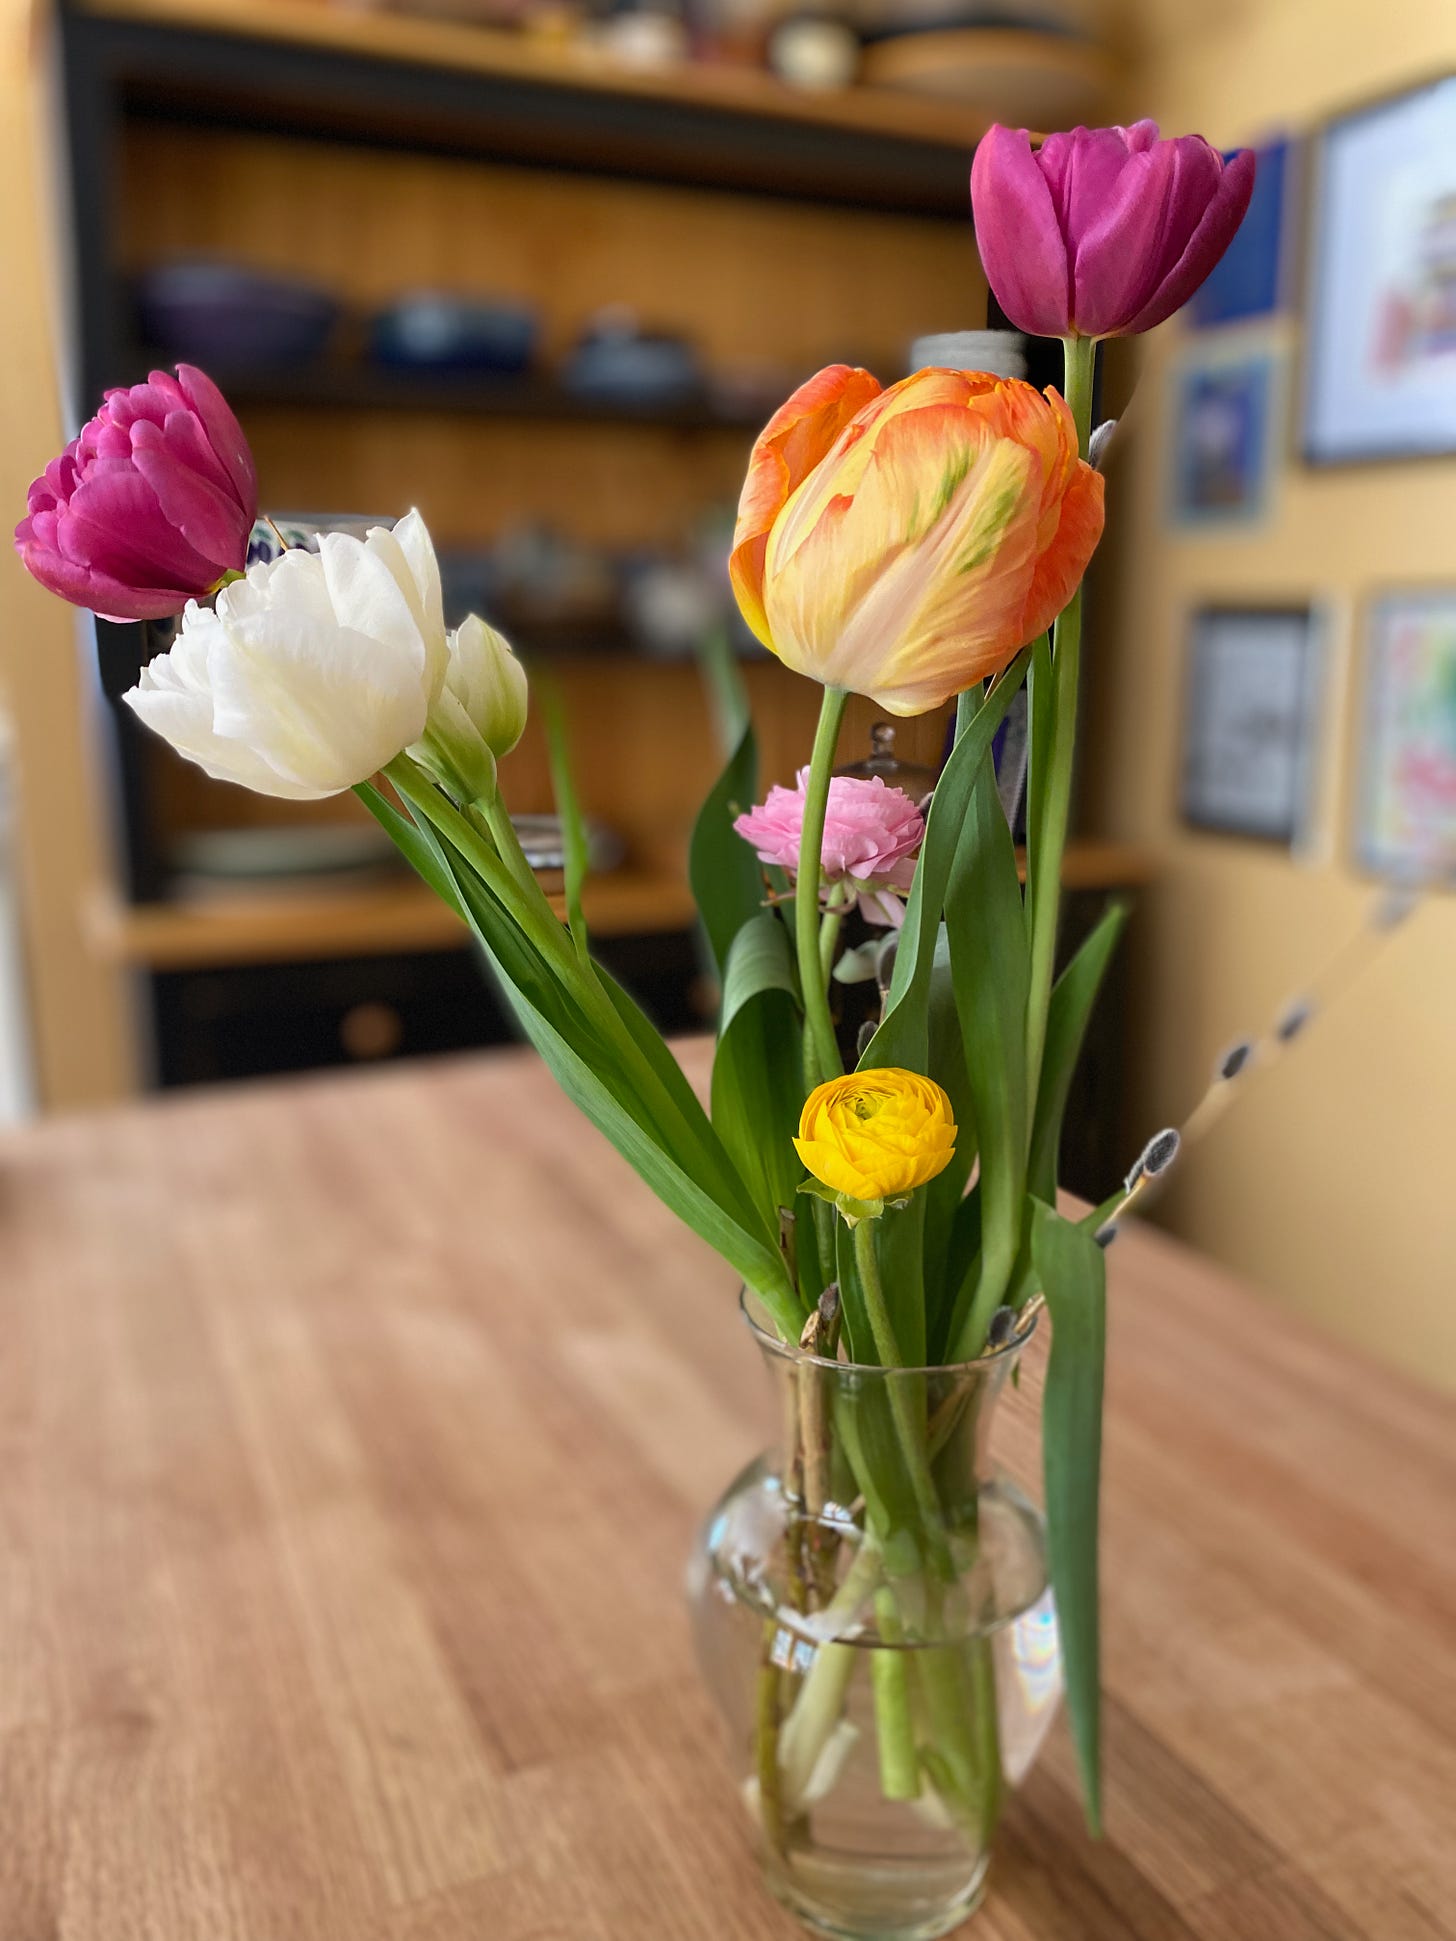 A glass vase of pink, orange, and white tulips, yellow ranunculus, and branches of pussy willow.